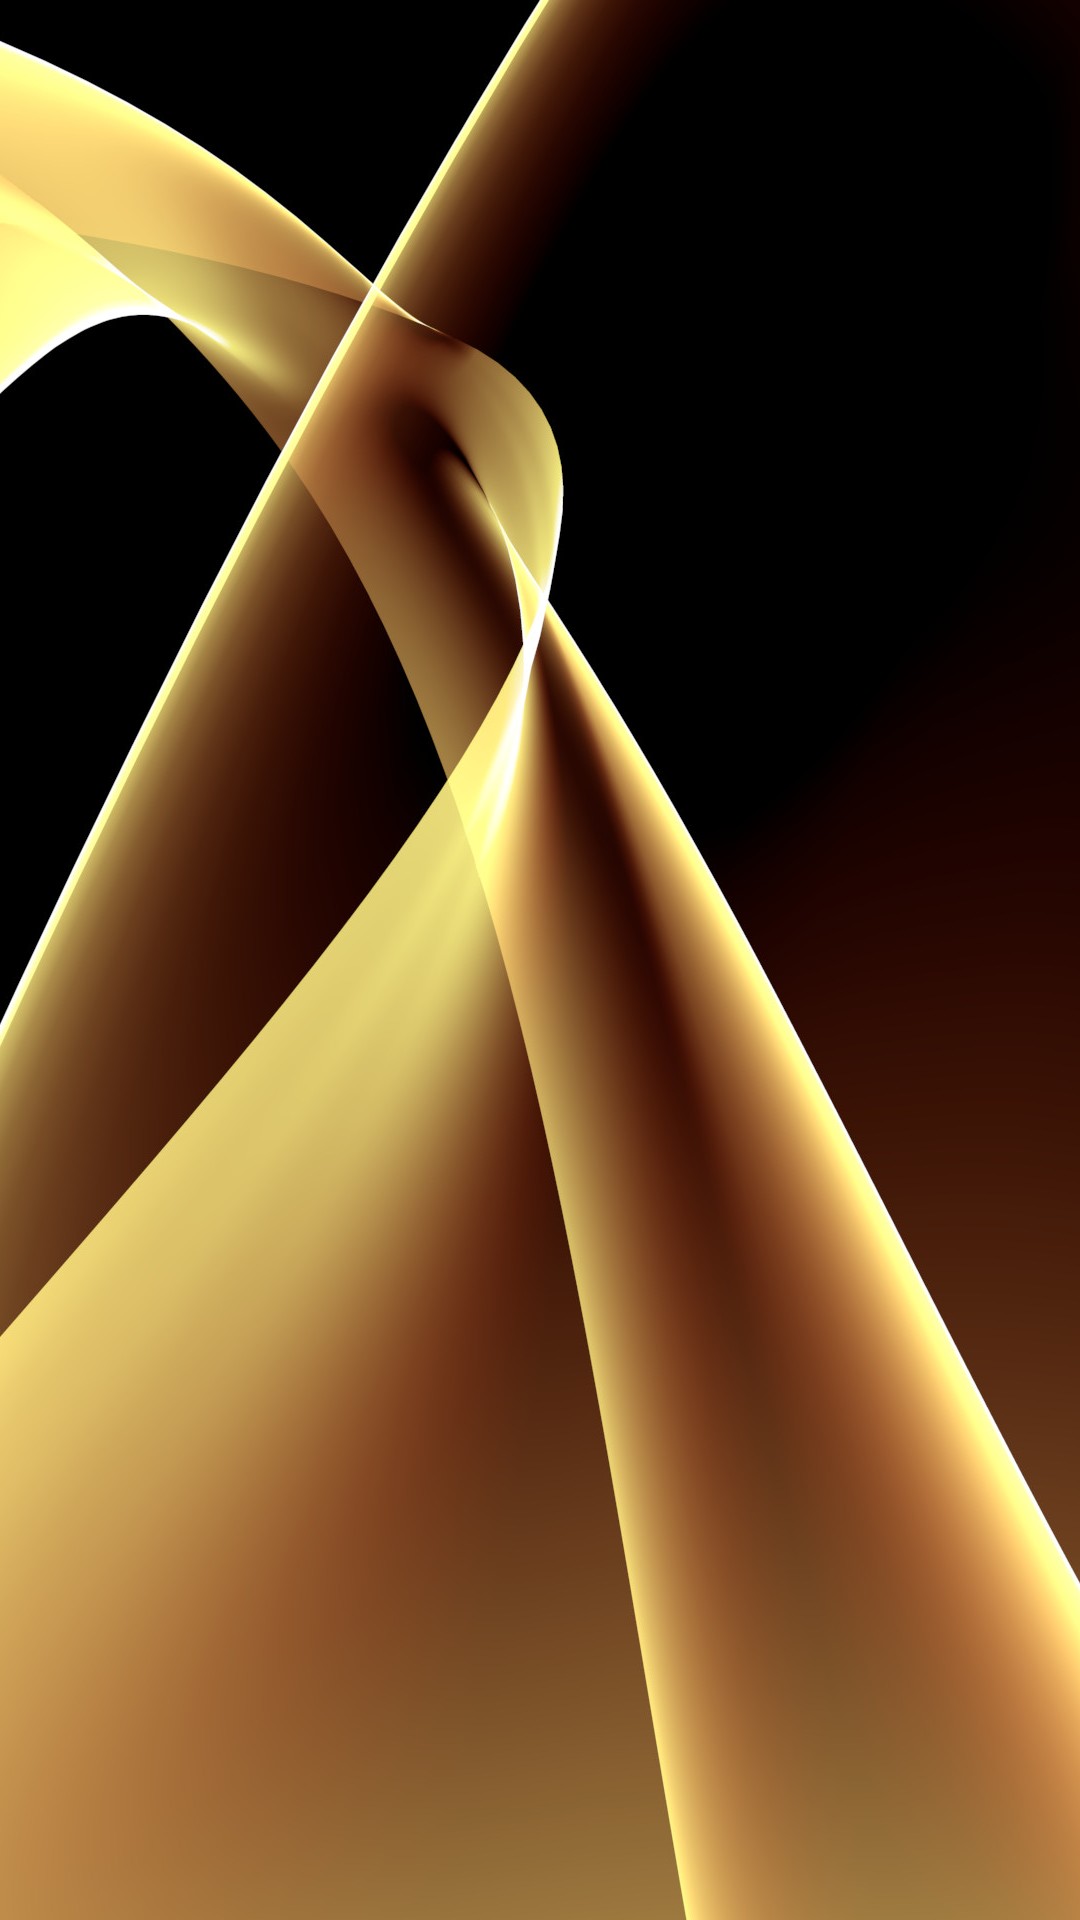 iPhone X Wallpaper Black and Gold - 2021 3D iPhone Wallpaper